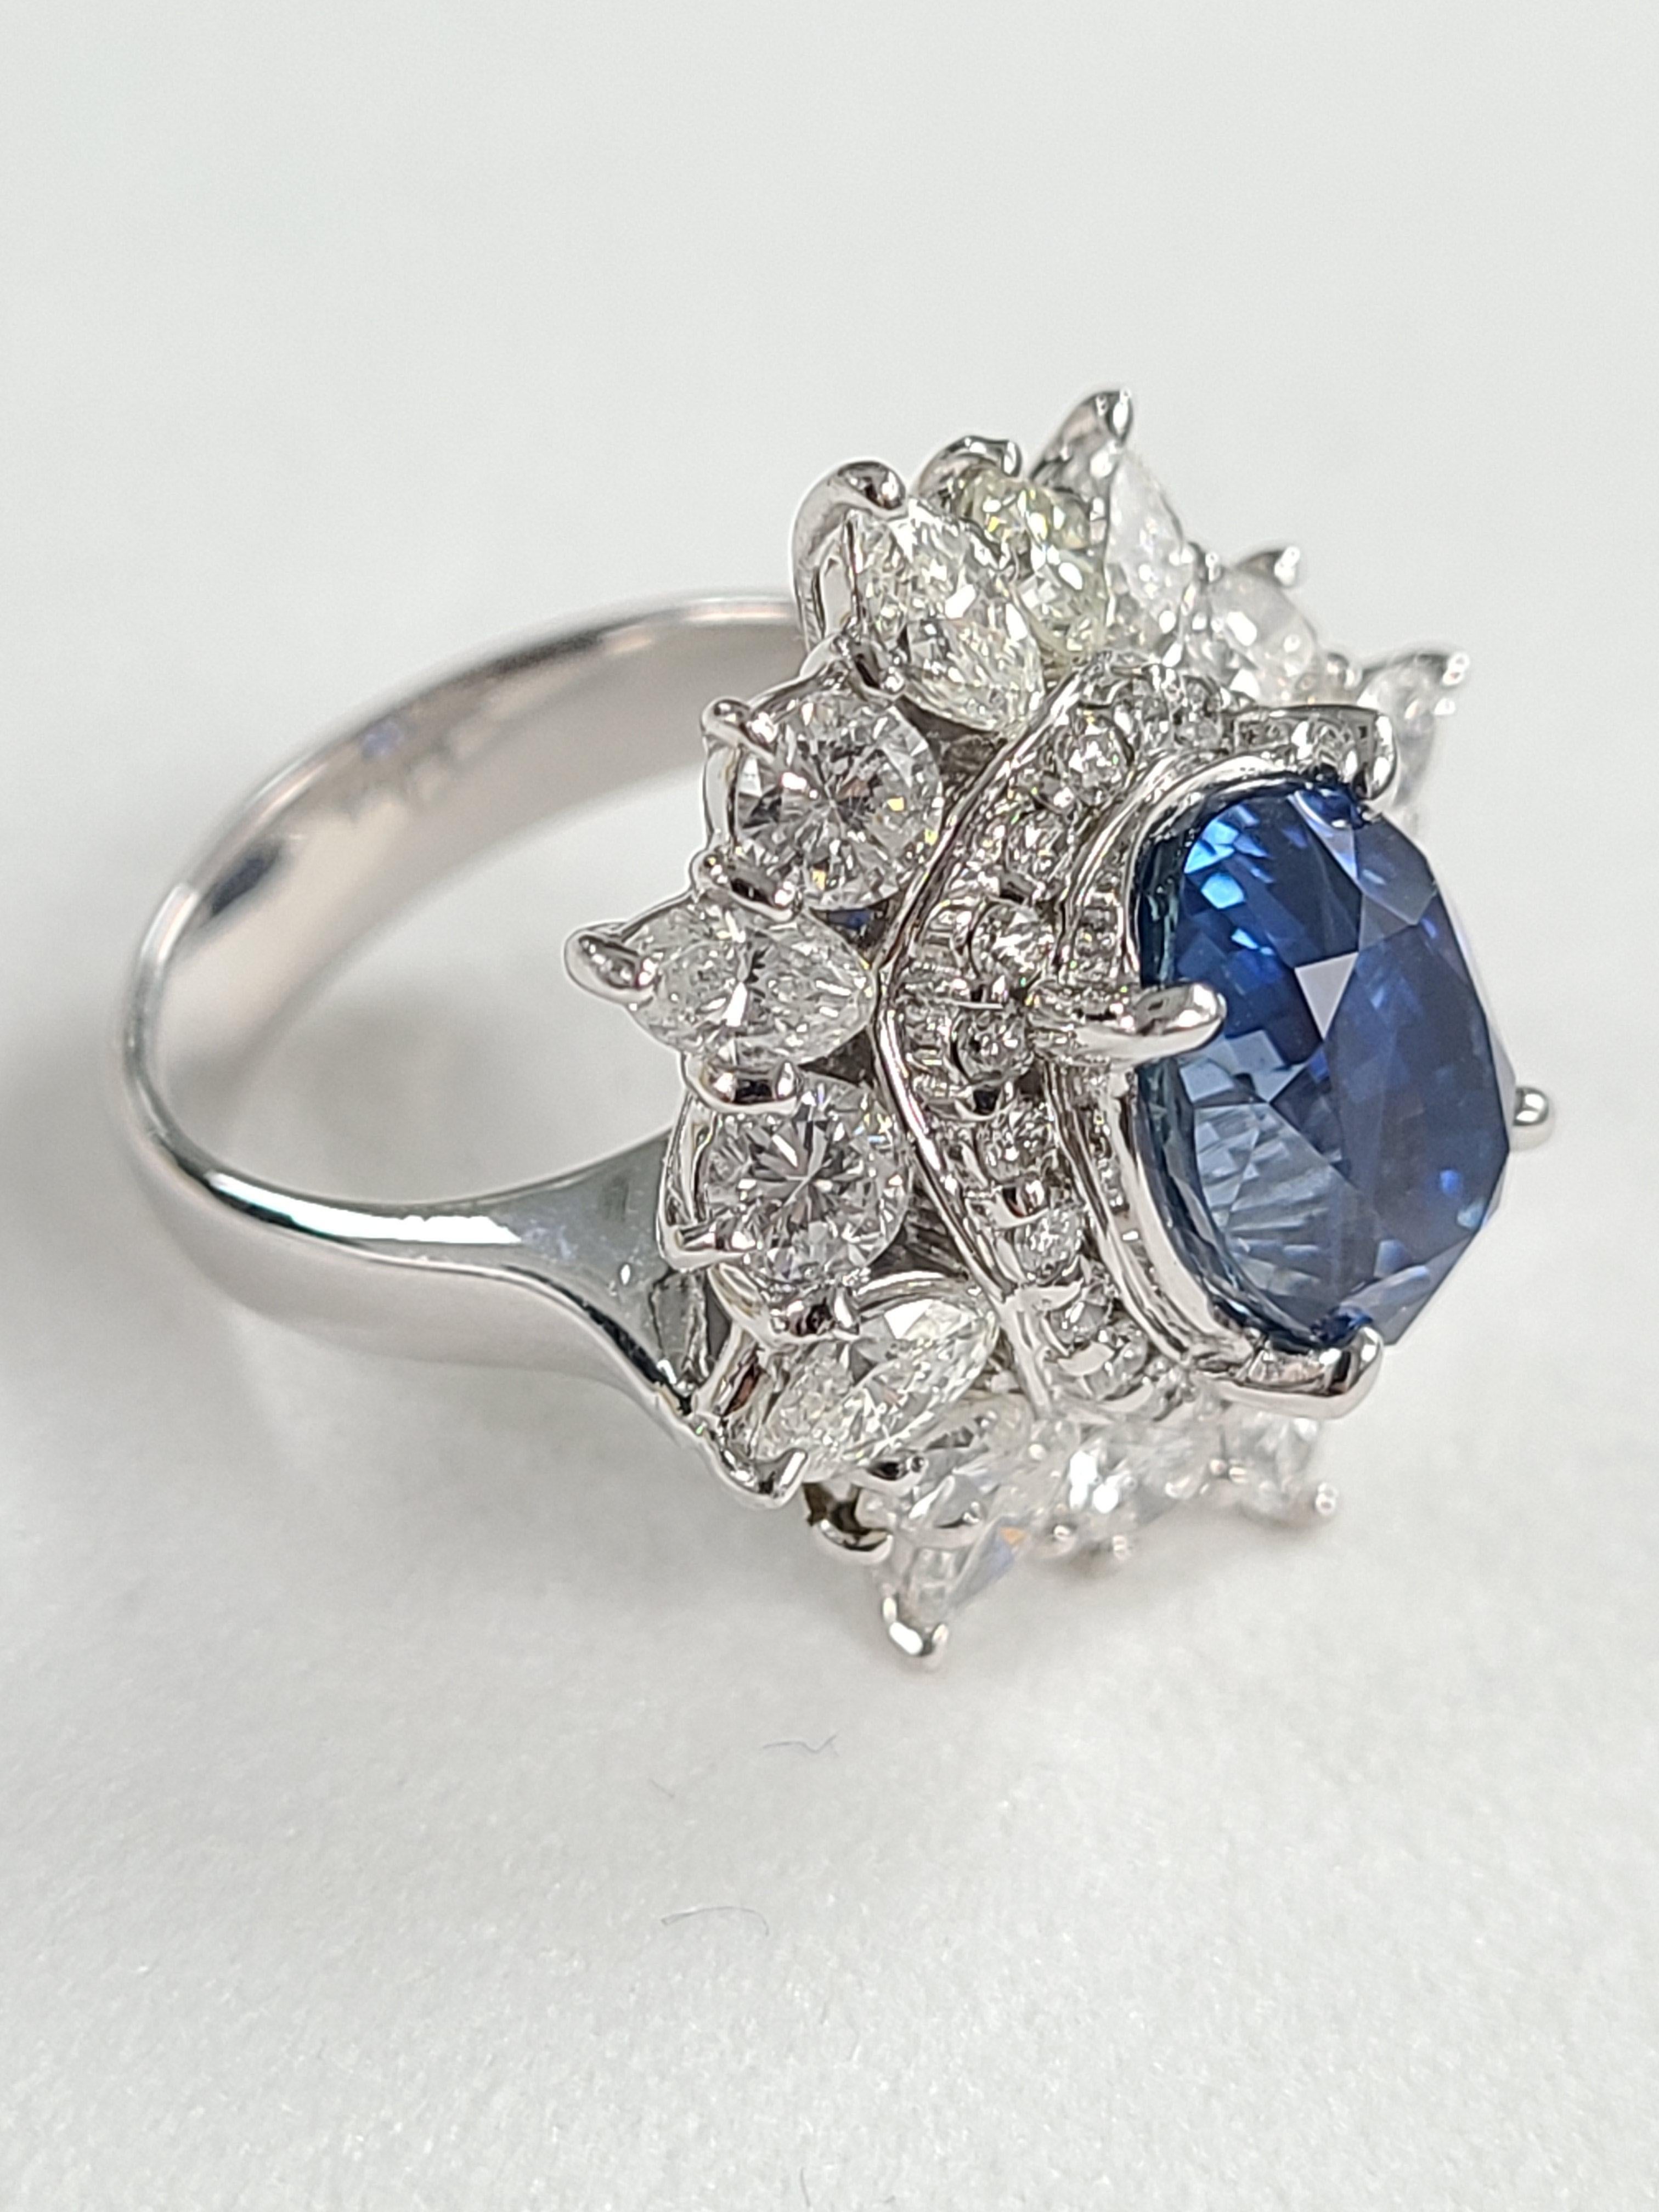 A beautiful and elegant blue sapphire ring set in platinum PT900 with natural diamonds. The blue sapphire weight is 5.973 carats and diamond weight is 2.792 carats . The ring dimensions in cm 2 x 2 x 2.8 (L X W X H). US size 6 1/2.